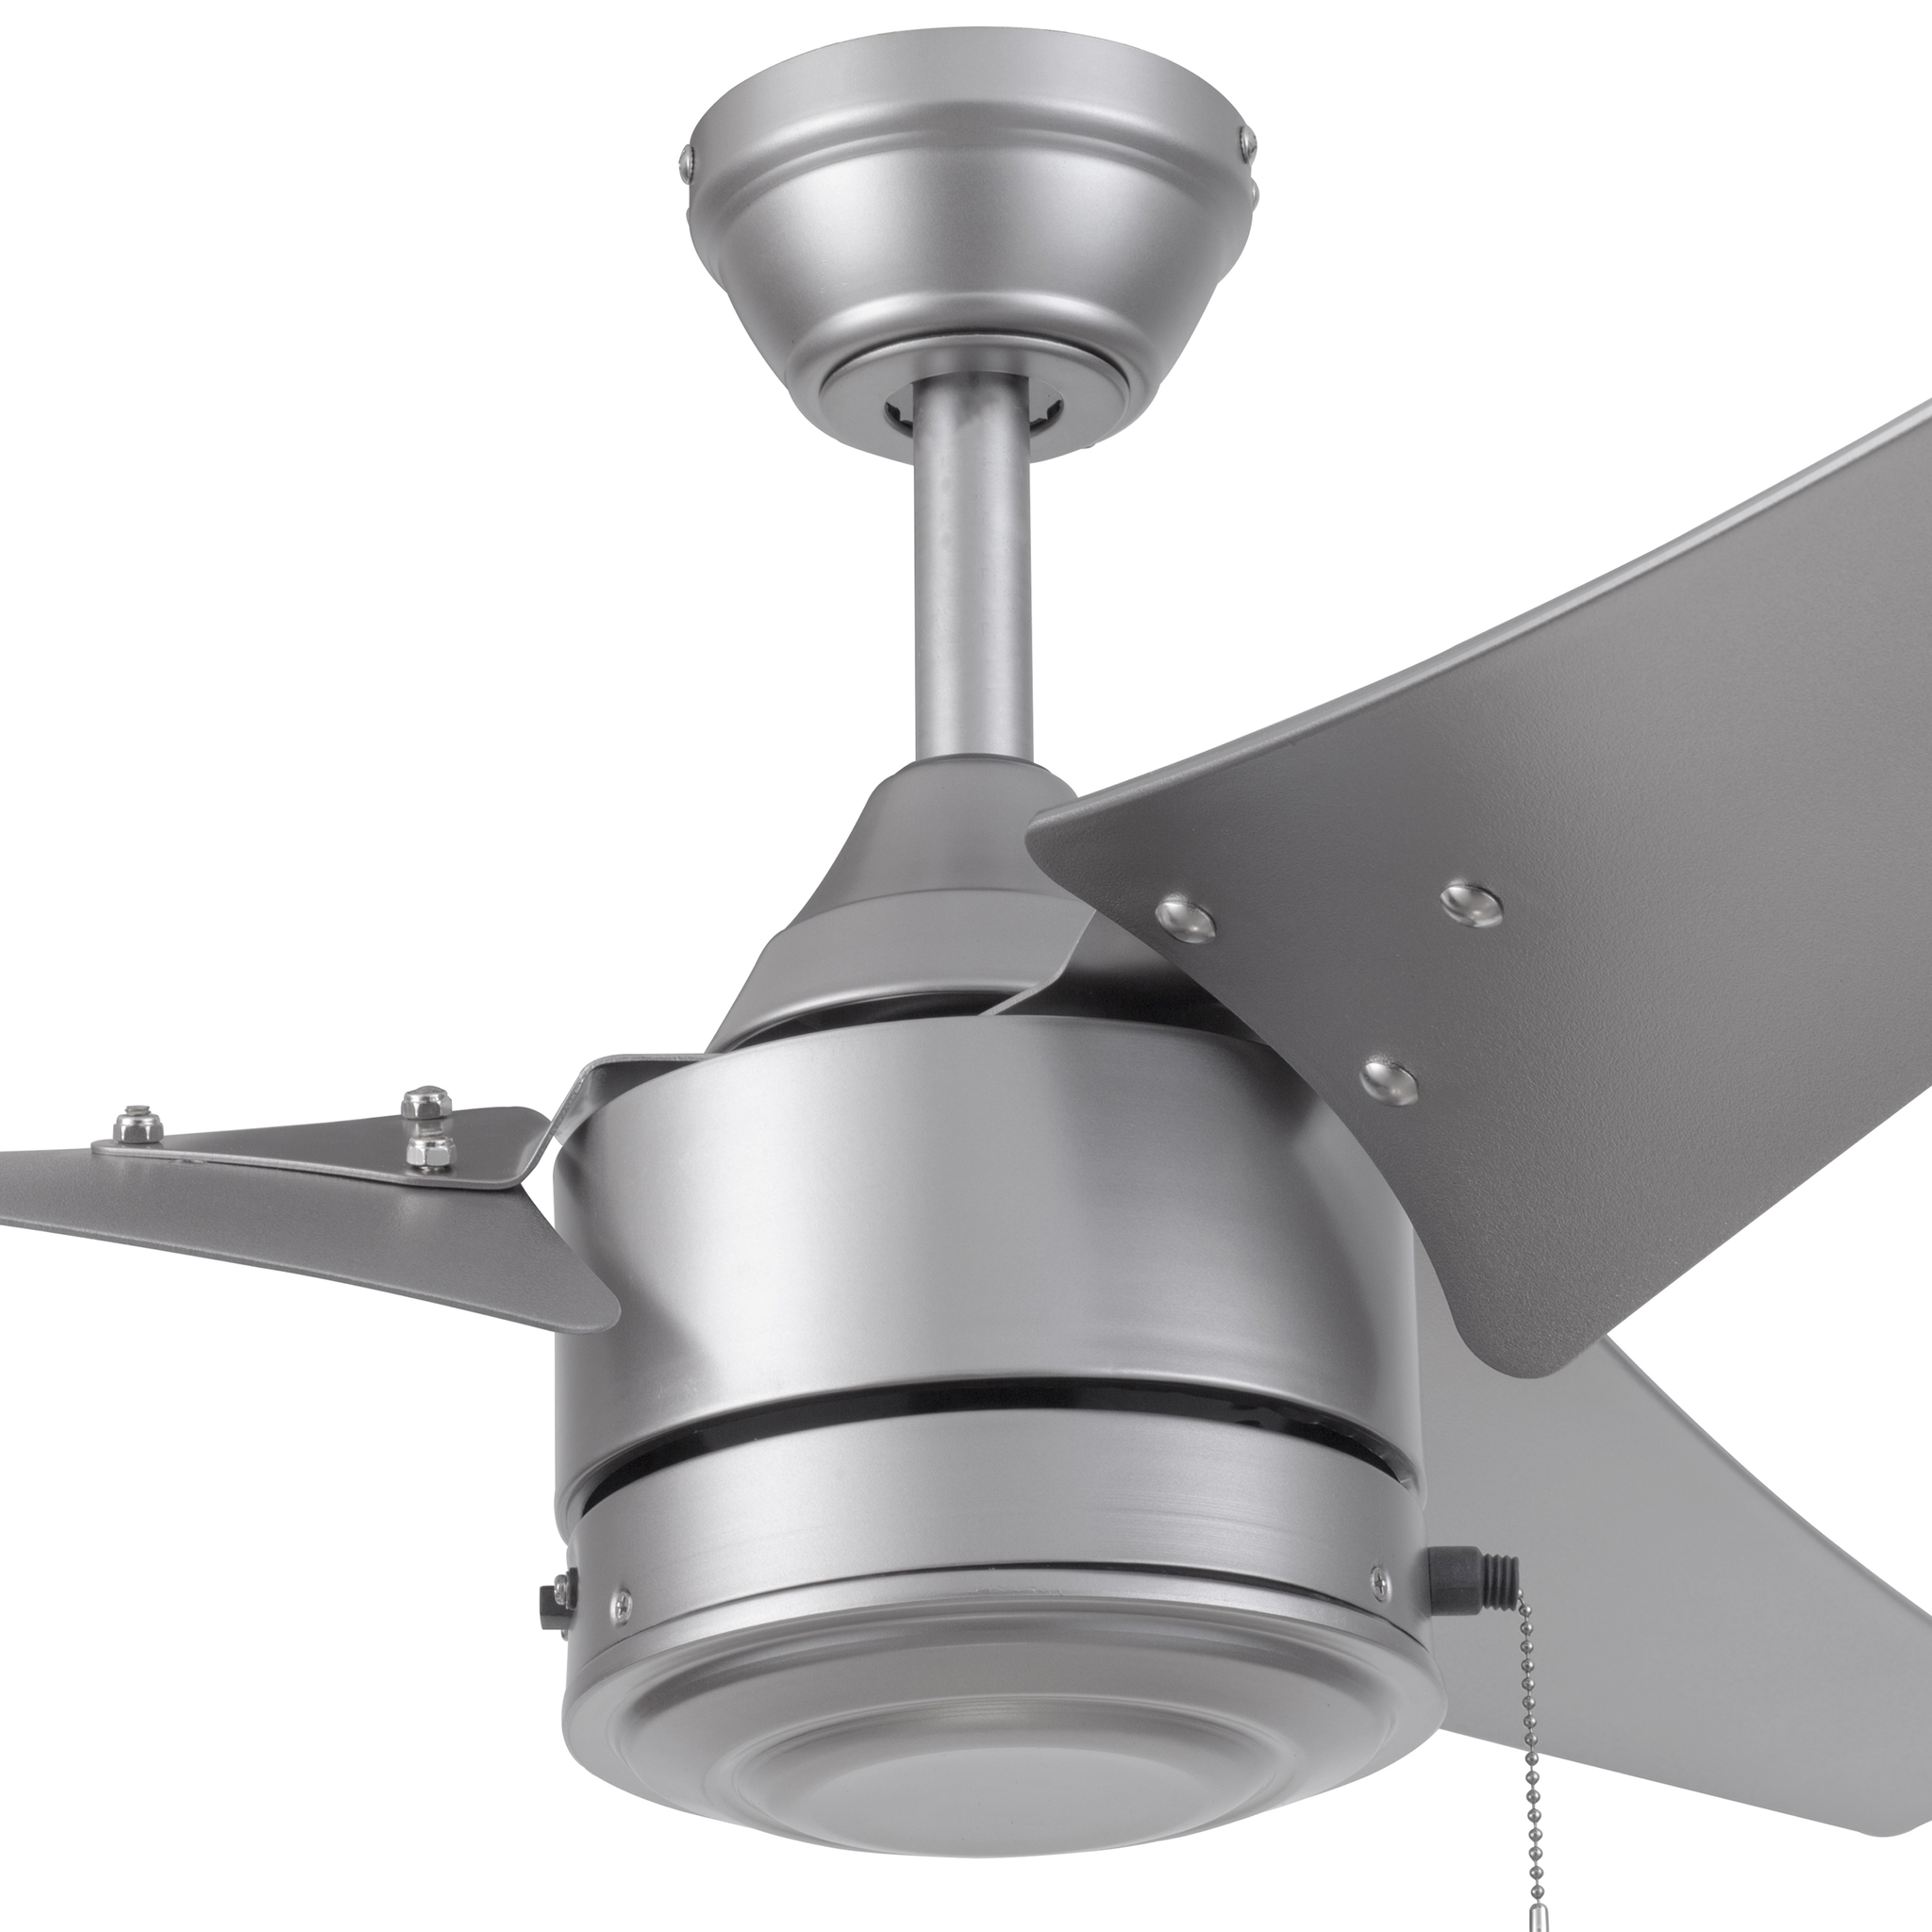 56 Inch Talib, Pewter, Pull Chain, Indoor/Outdoor Ceiling Fan by Prominence Home